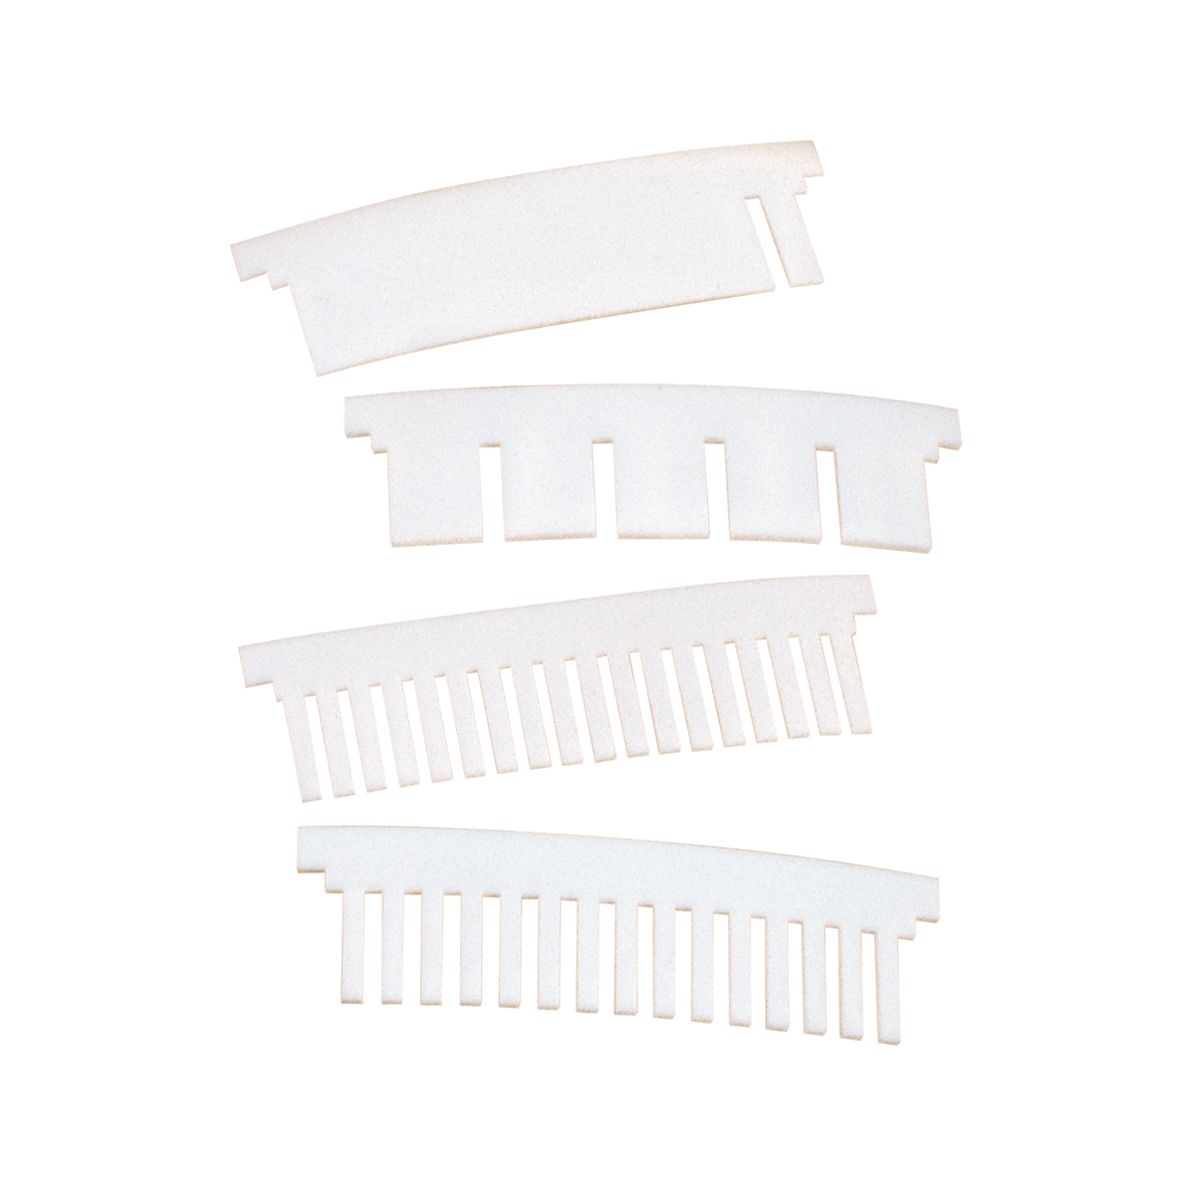 Standard and Preparative Combs for SE300 miniVE, SE260, and SE250